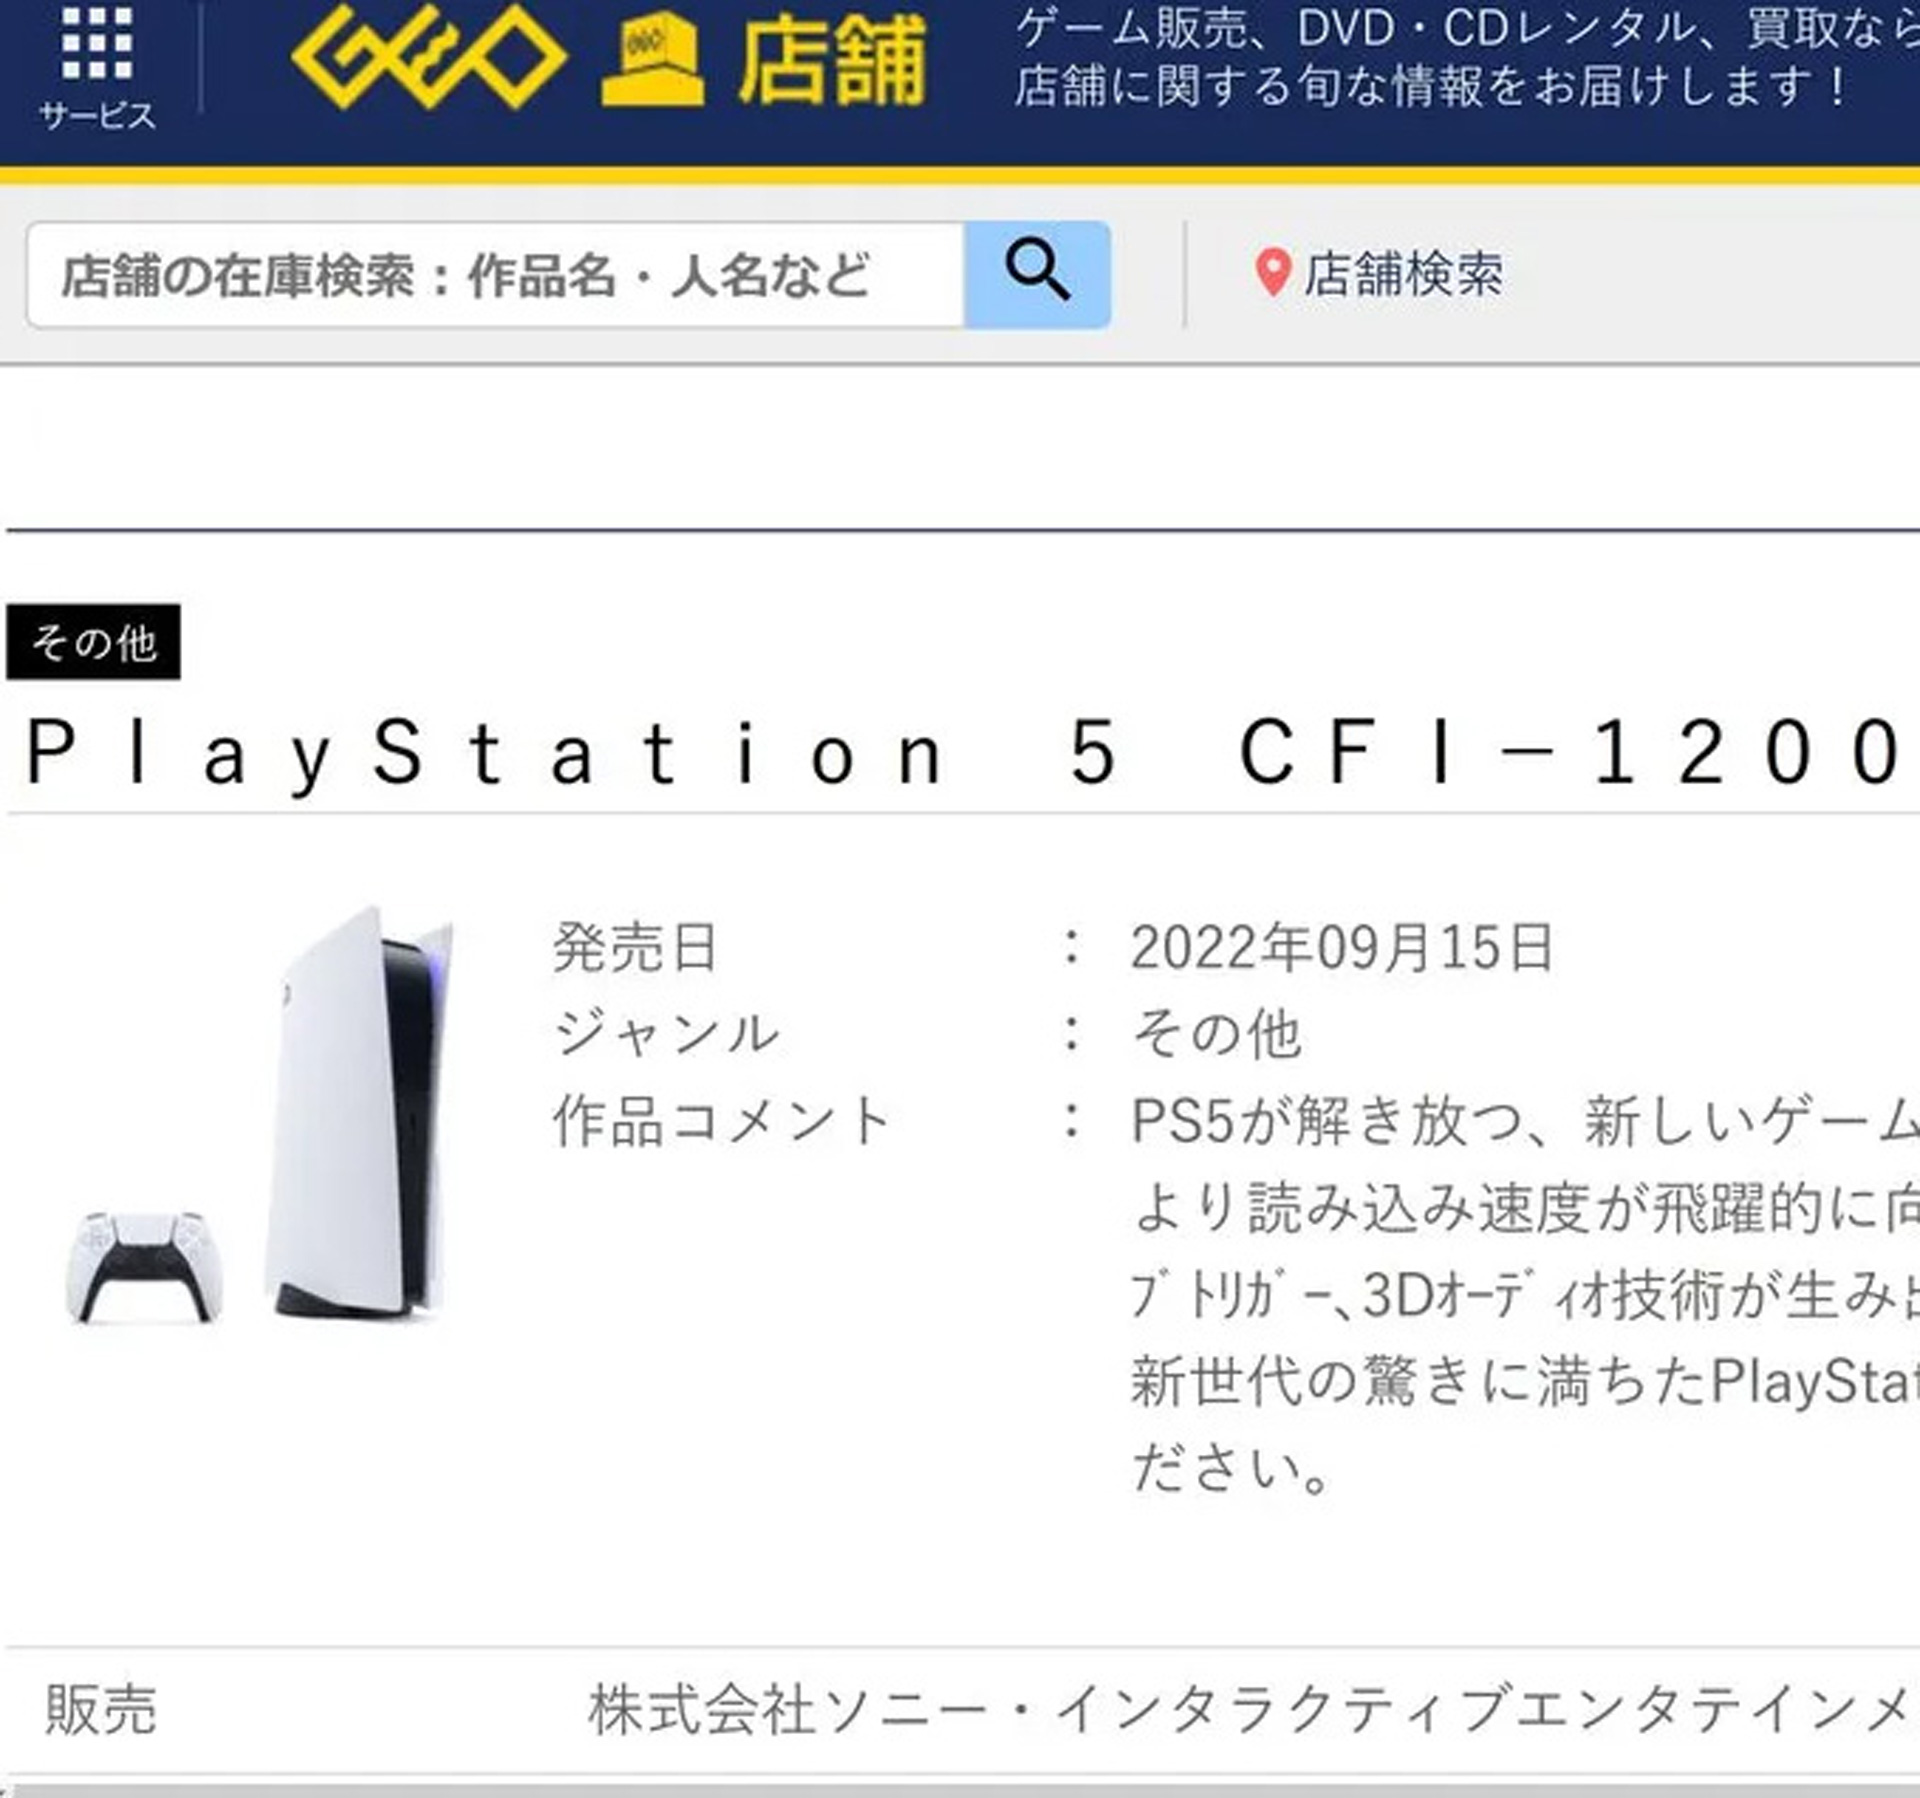 New PS5 Model (1200 Series) is coming